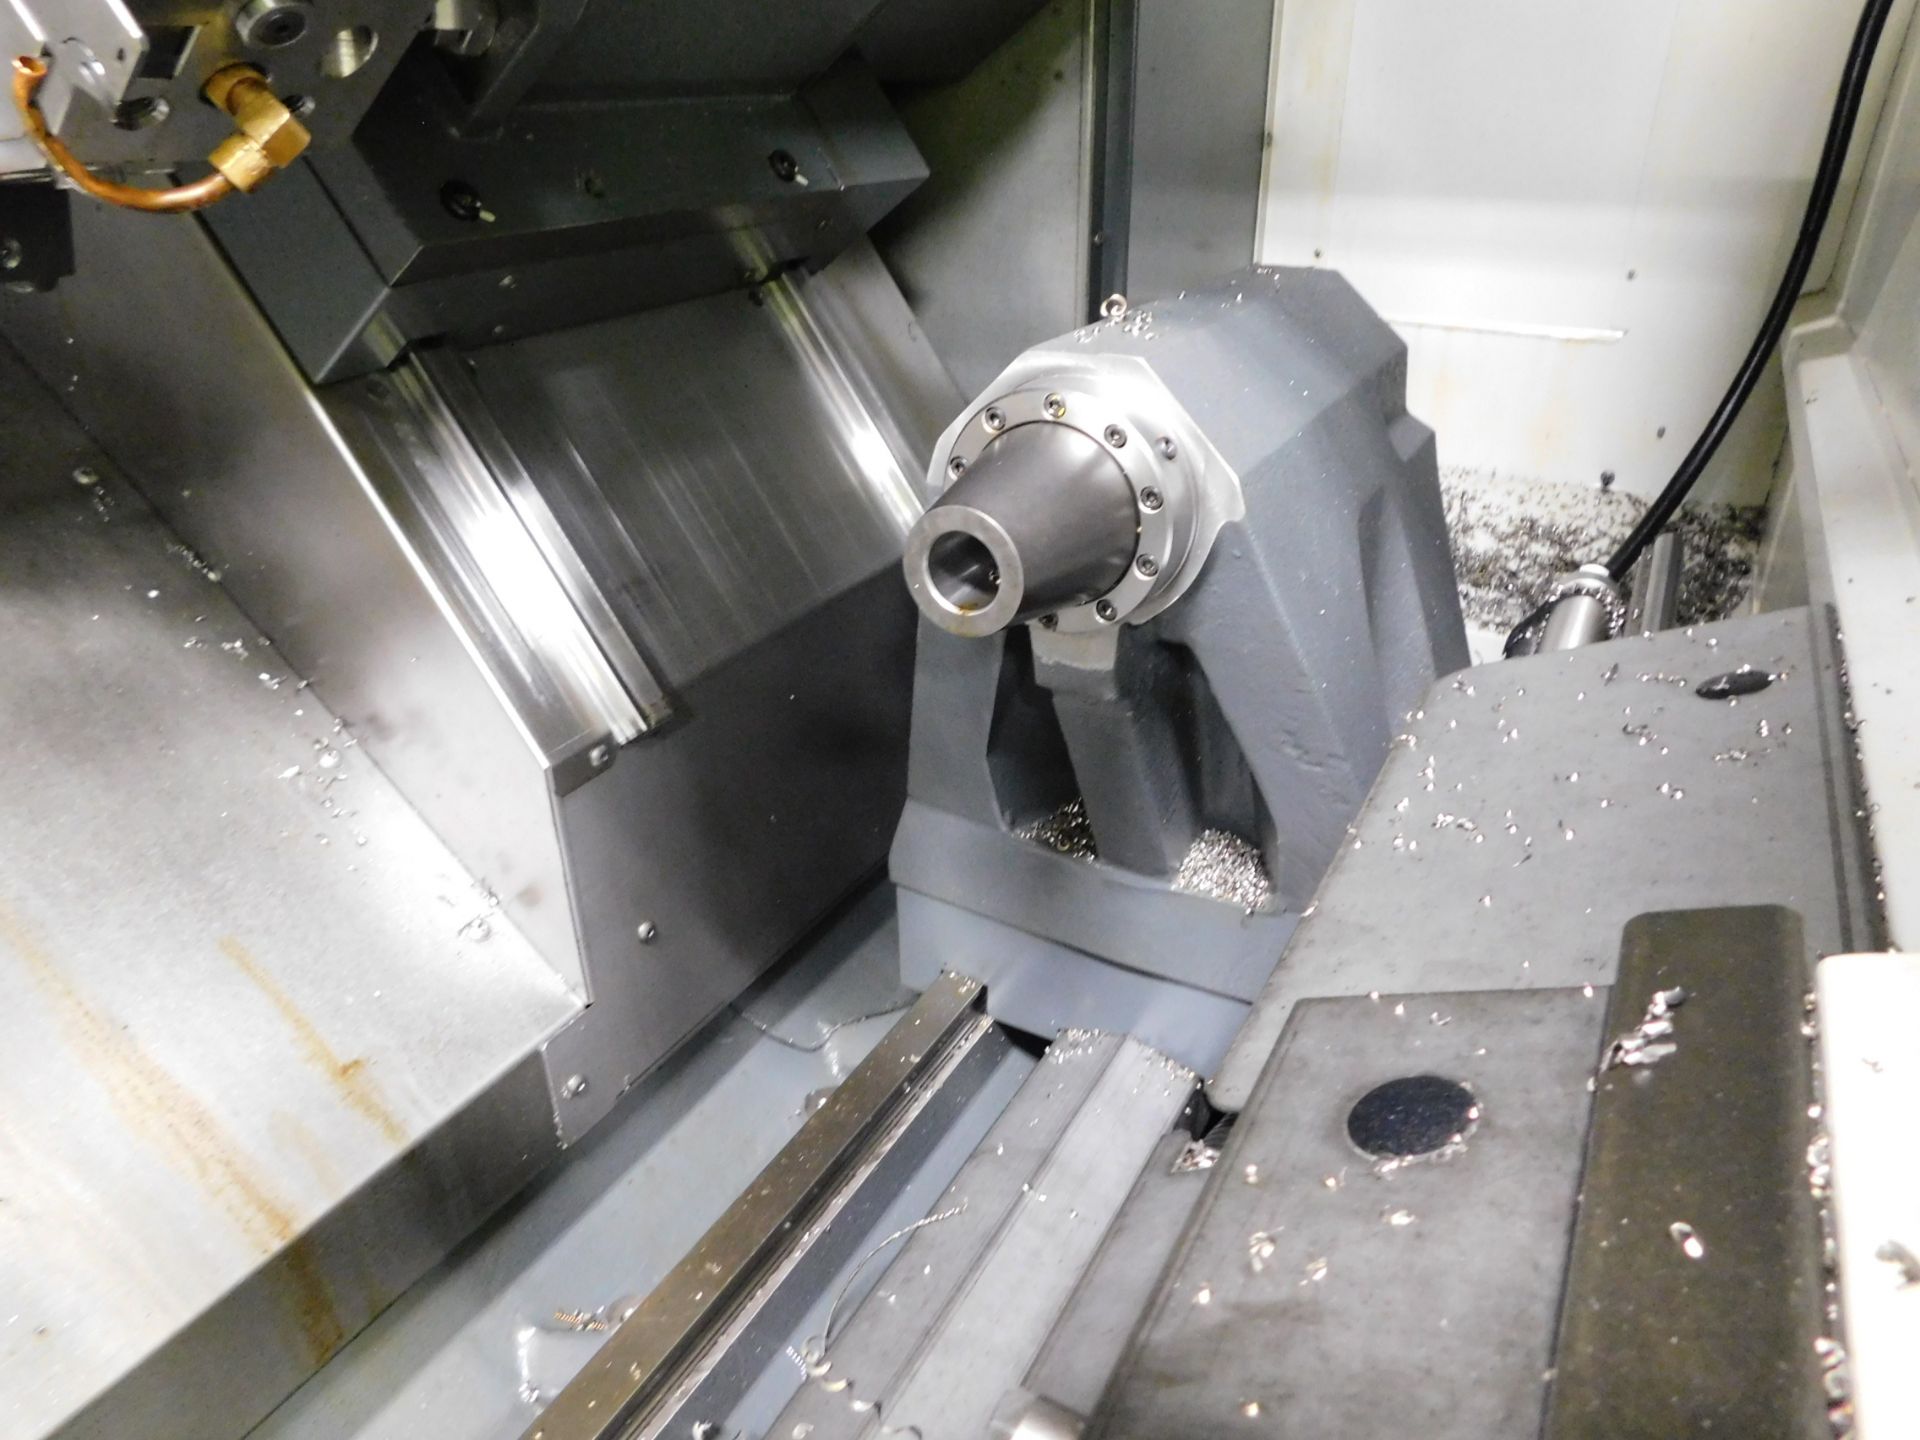 Haas ST30 CNC Turning Center sn 3119670, New in 2020, 12"3-Jaw Chuck, 12-Station Turret, - Image 7 of 16